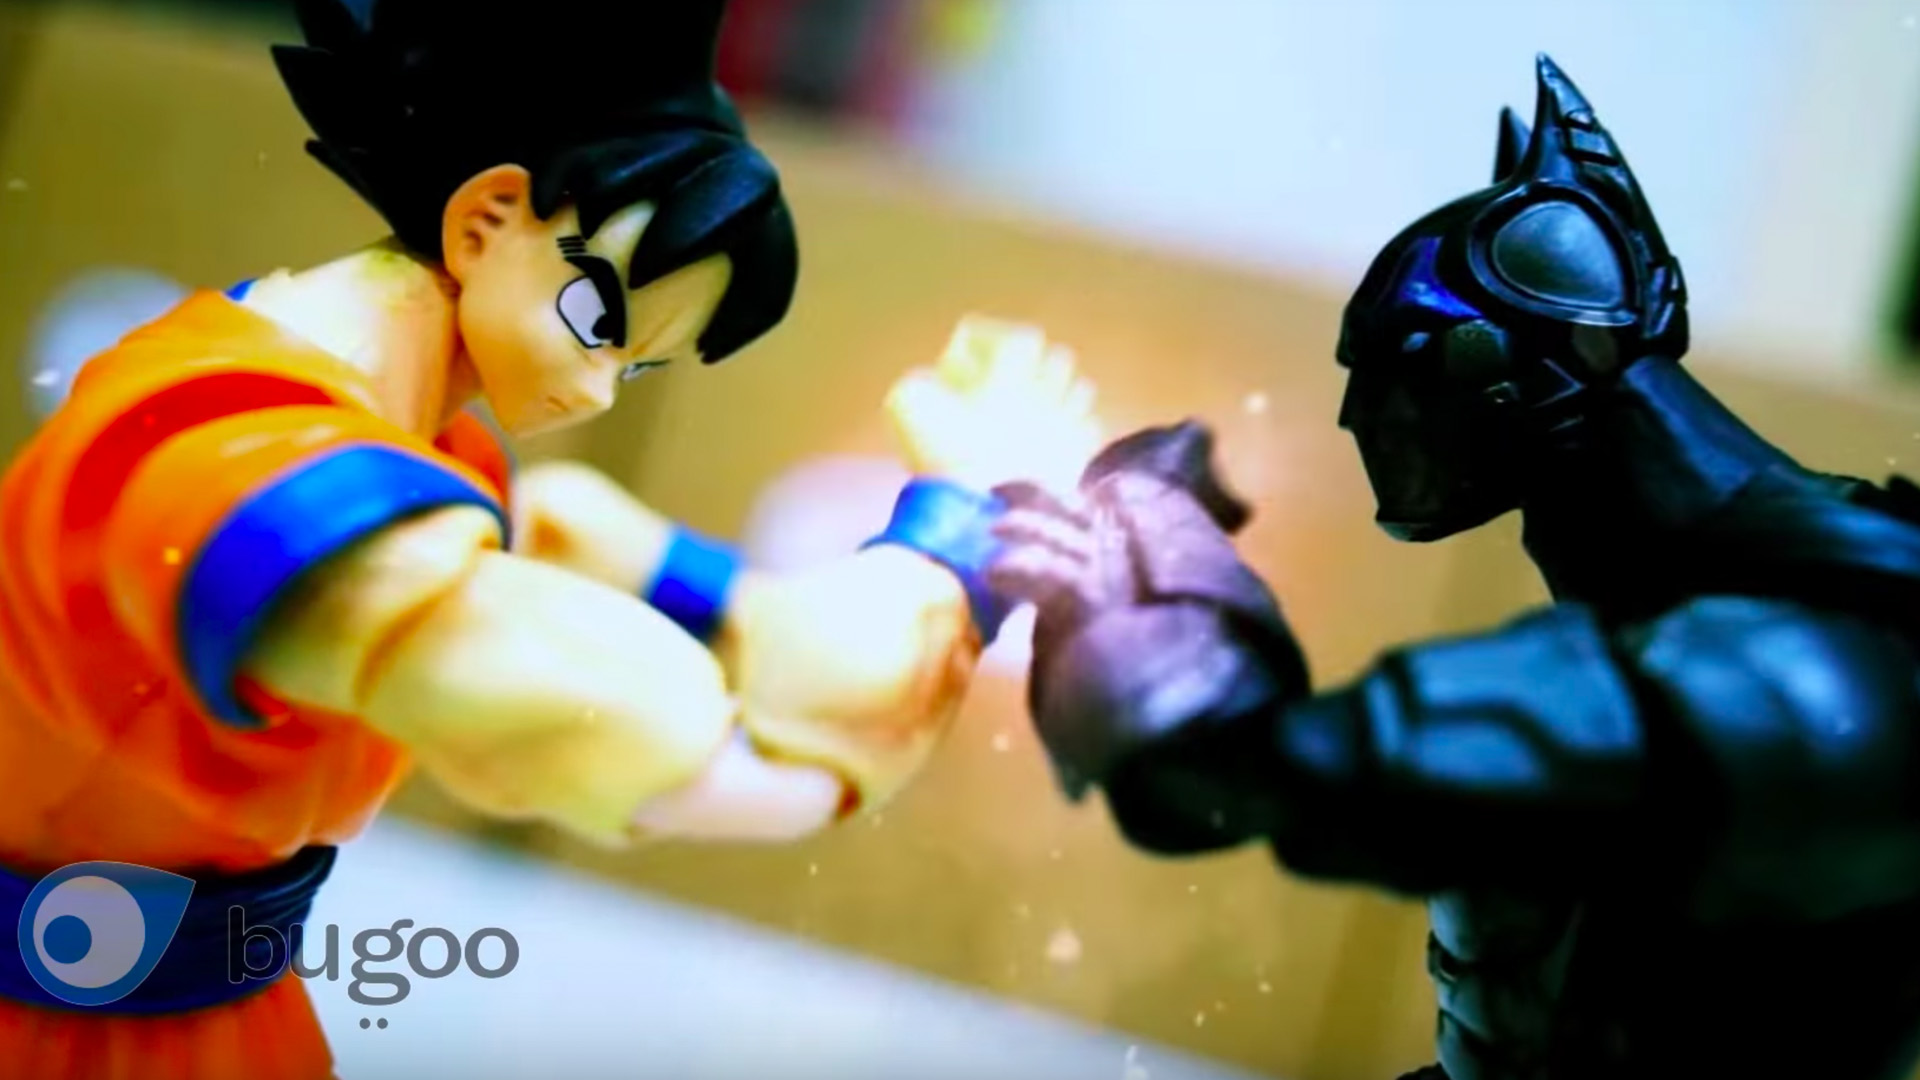 Goku Brawls With Android Batman in Fan-Made Stop-Motion Video — GeekTyrant